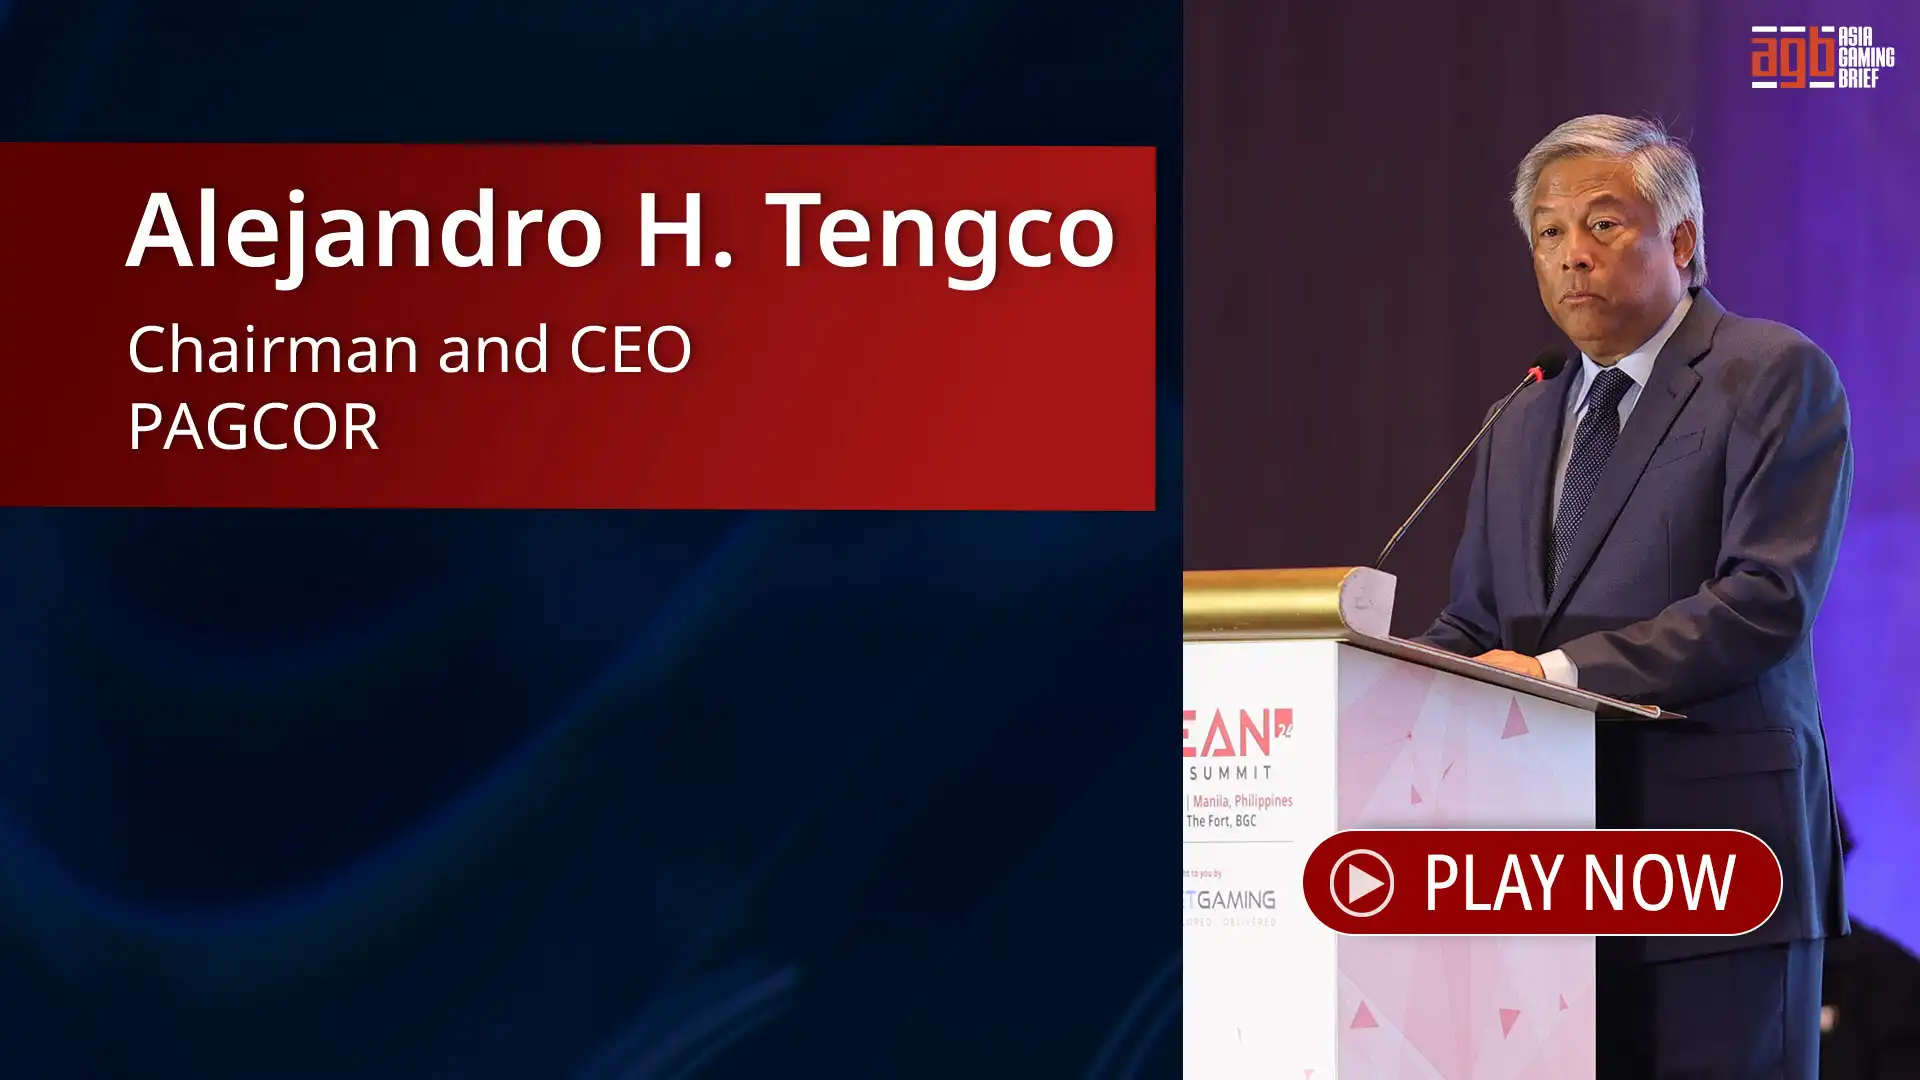 PAGCOR excited about growth in eGaming segment, Alejandro H. Tengco